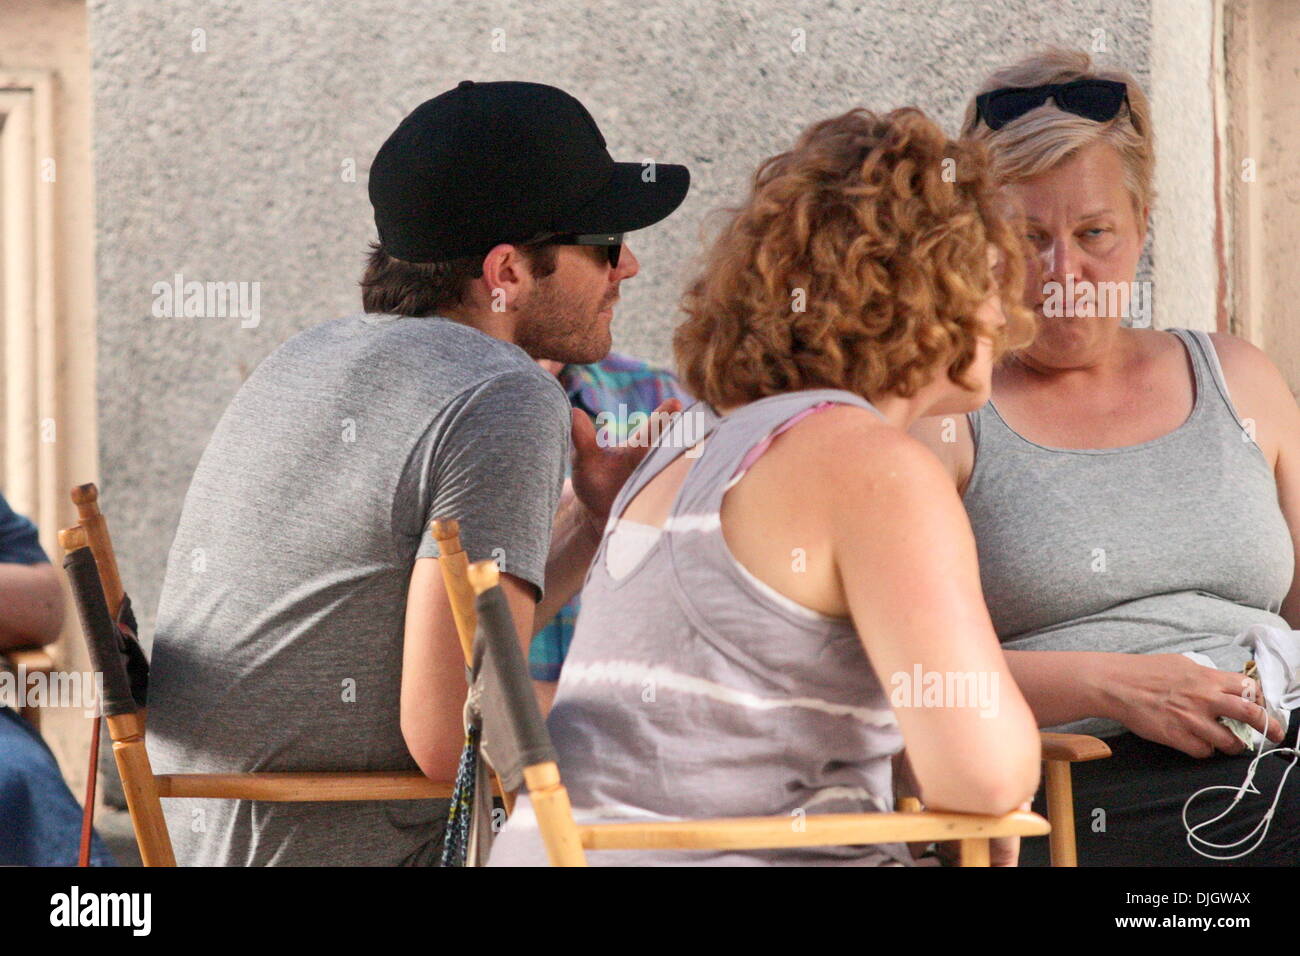 Jake Gyllenhaal visits his mom, director and screenwriter Naomi Foner on the set of her movie 'Very Good Girls' Dakota Fanning and Elizabeth Olsen star as young girls who both fall for the same street artist, played by Boyd Holbrook. Demi Moore also appea Stock Photo